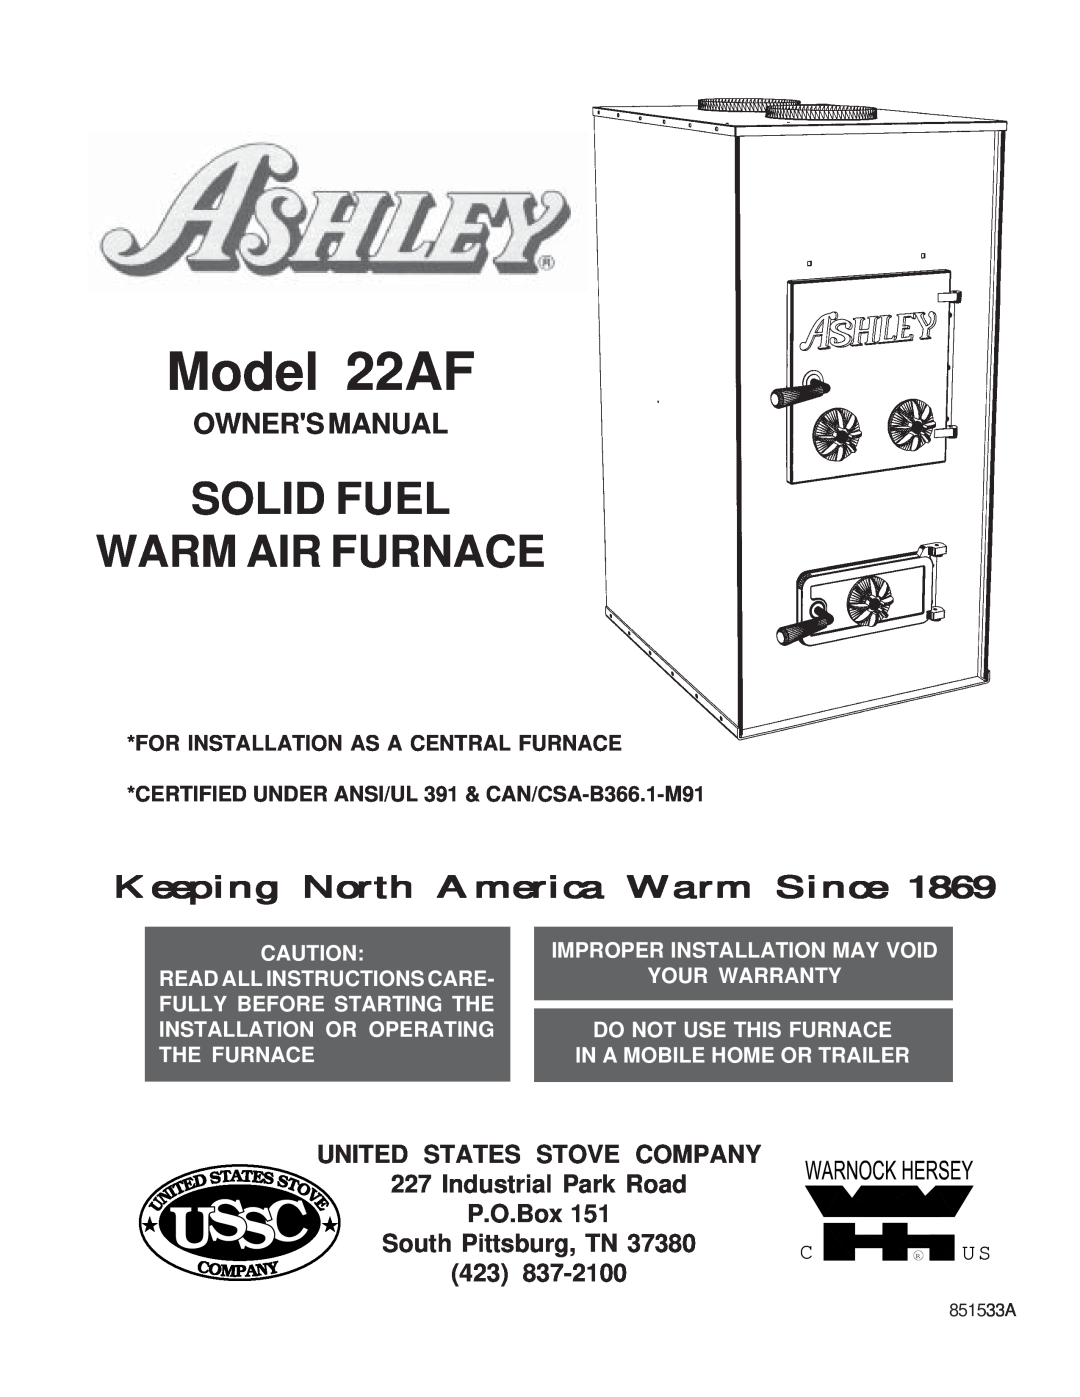 United States Stove owner manual Ussc, United States Stove Company, Model 22AF, Solid Fuel Warm Air Furnace, P.O.Box 